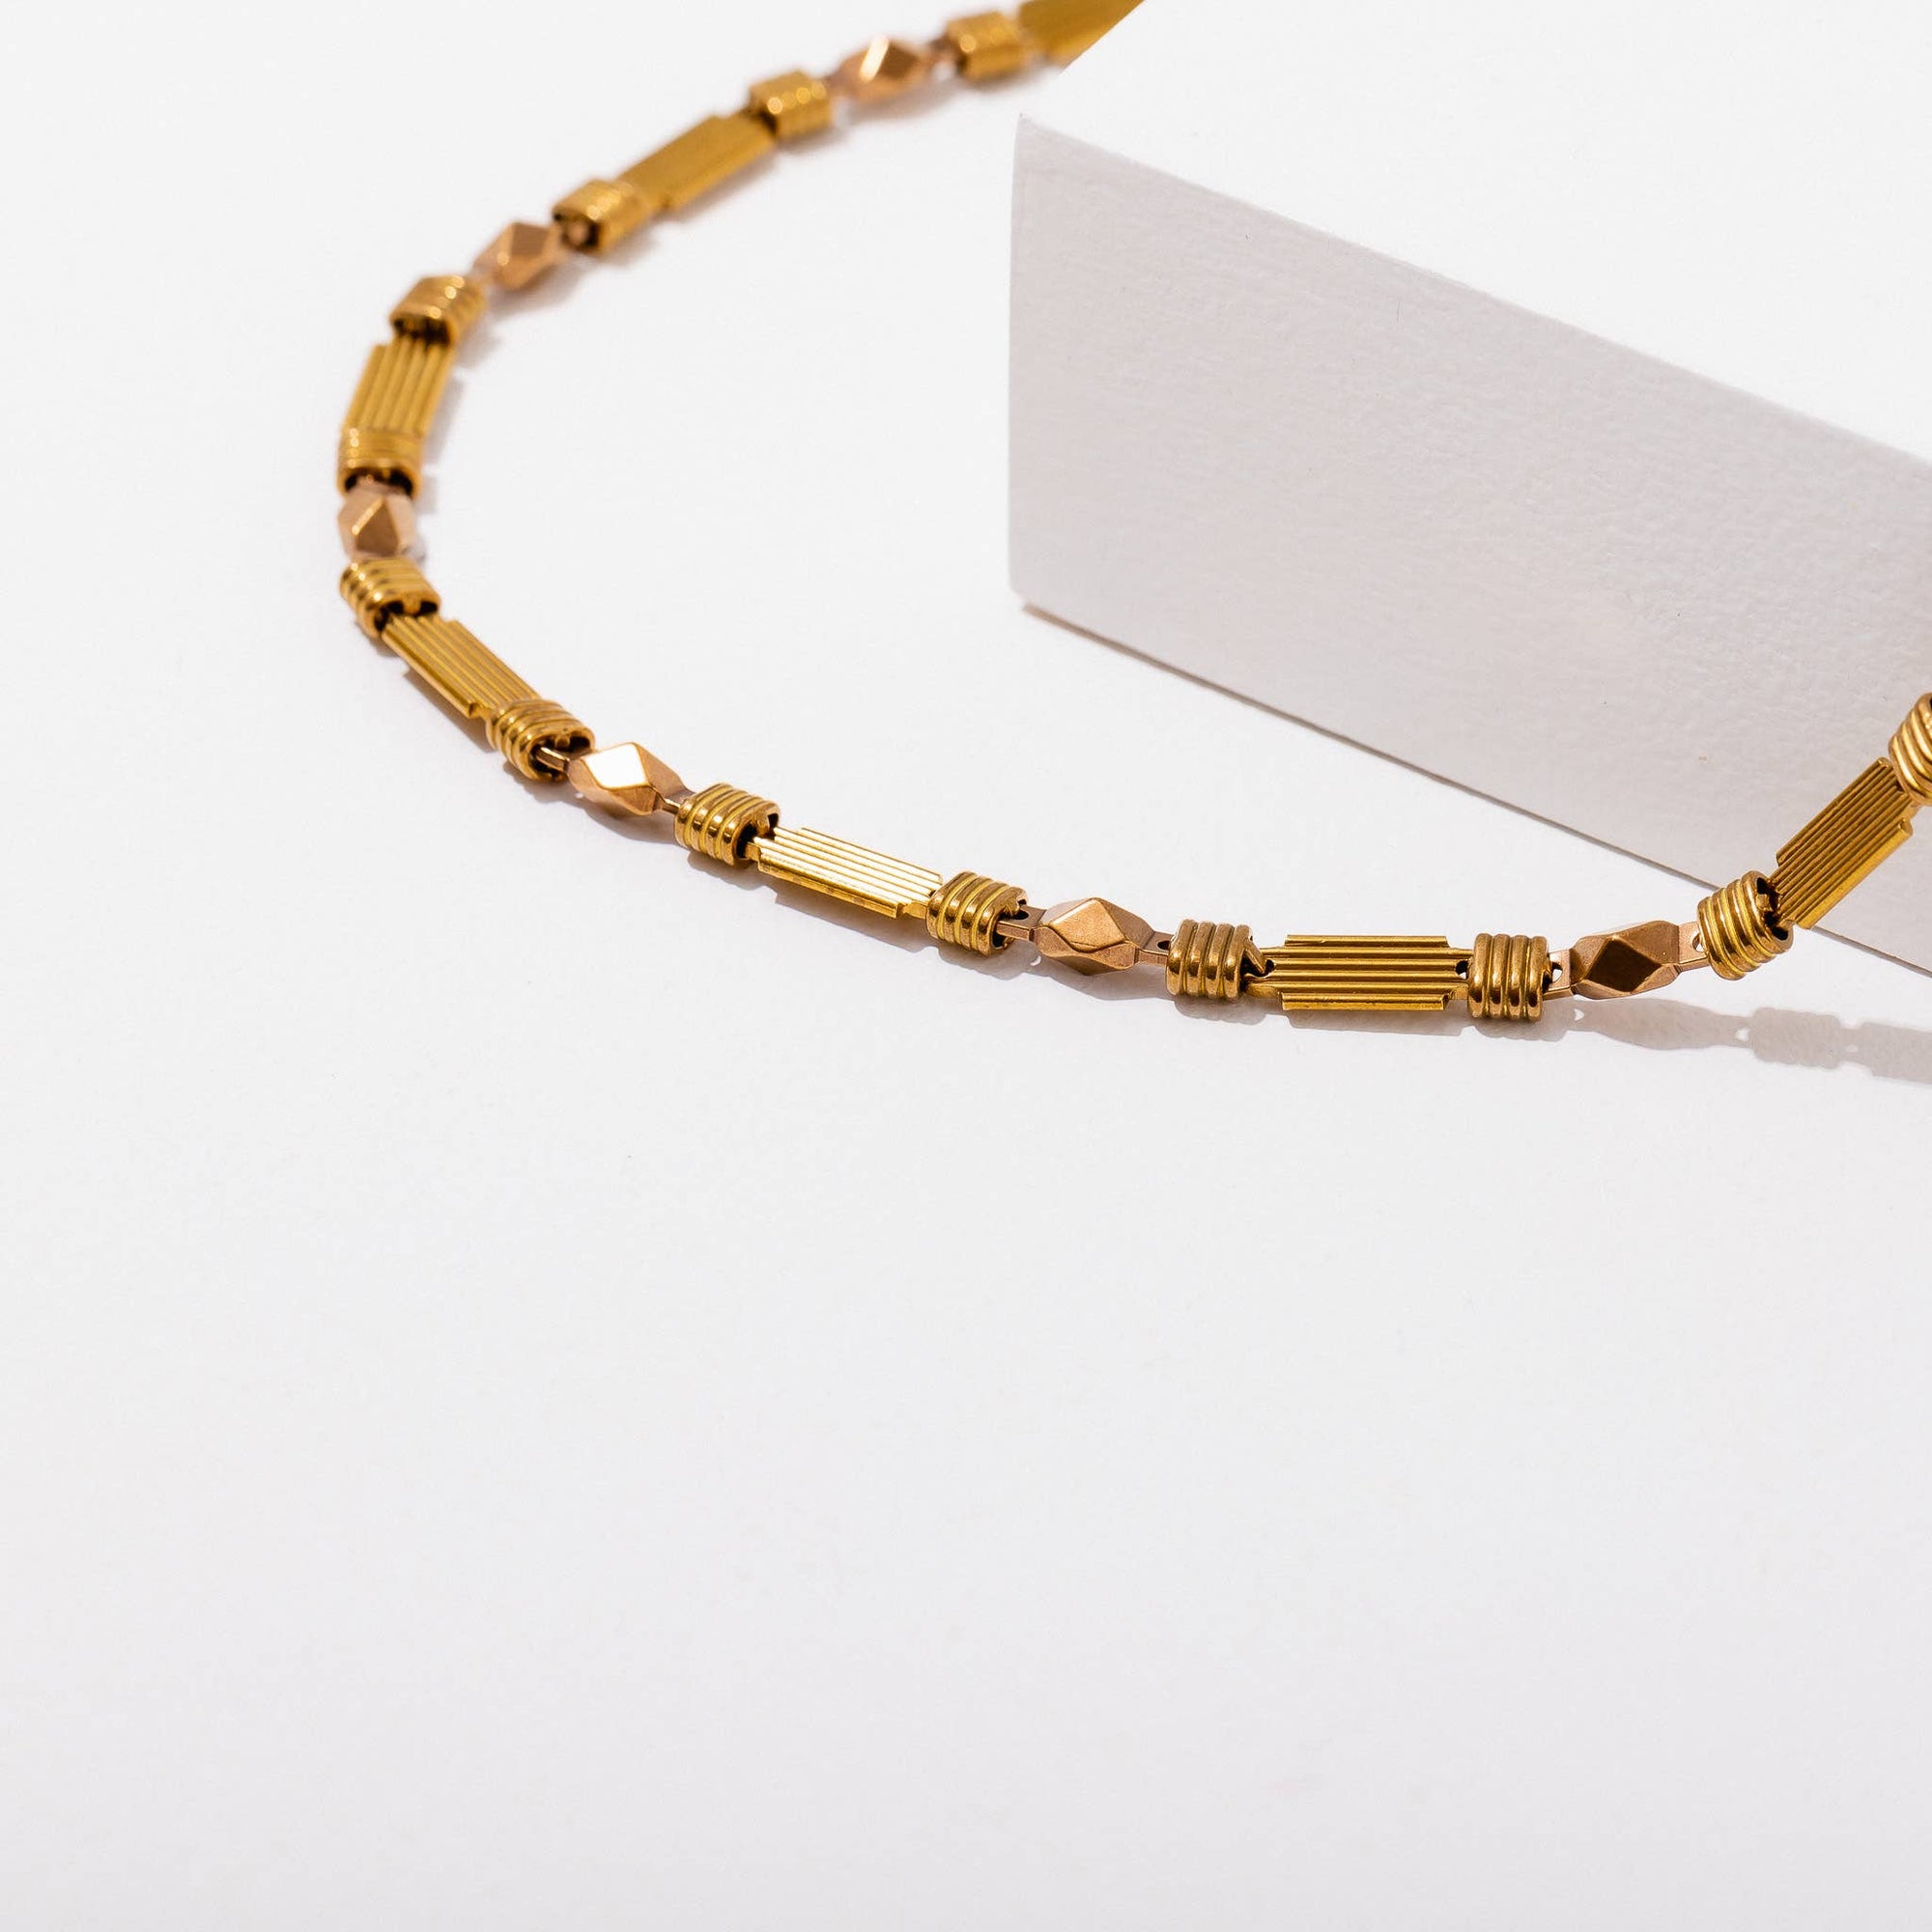 The Lupita Necklace by Larissa Loden